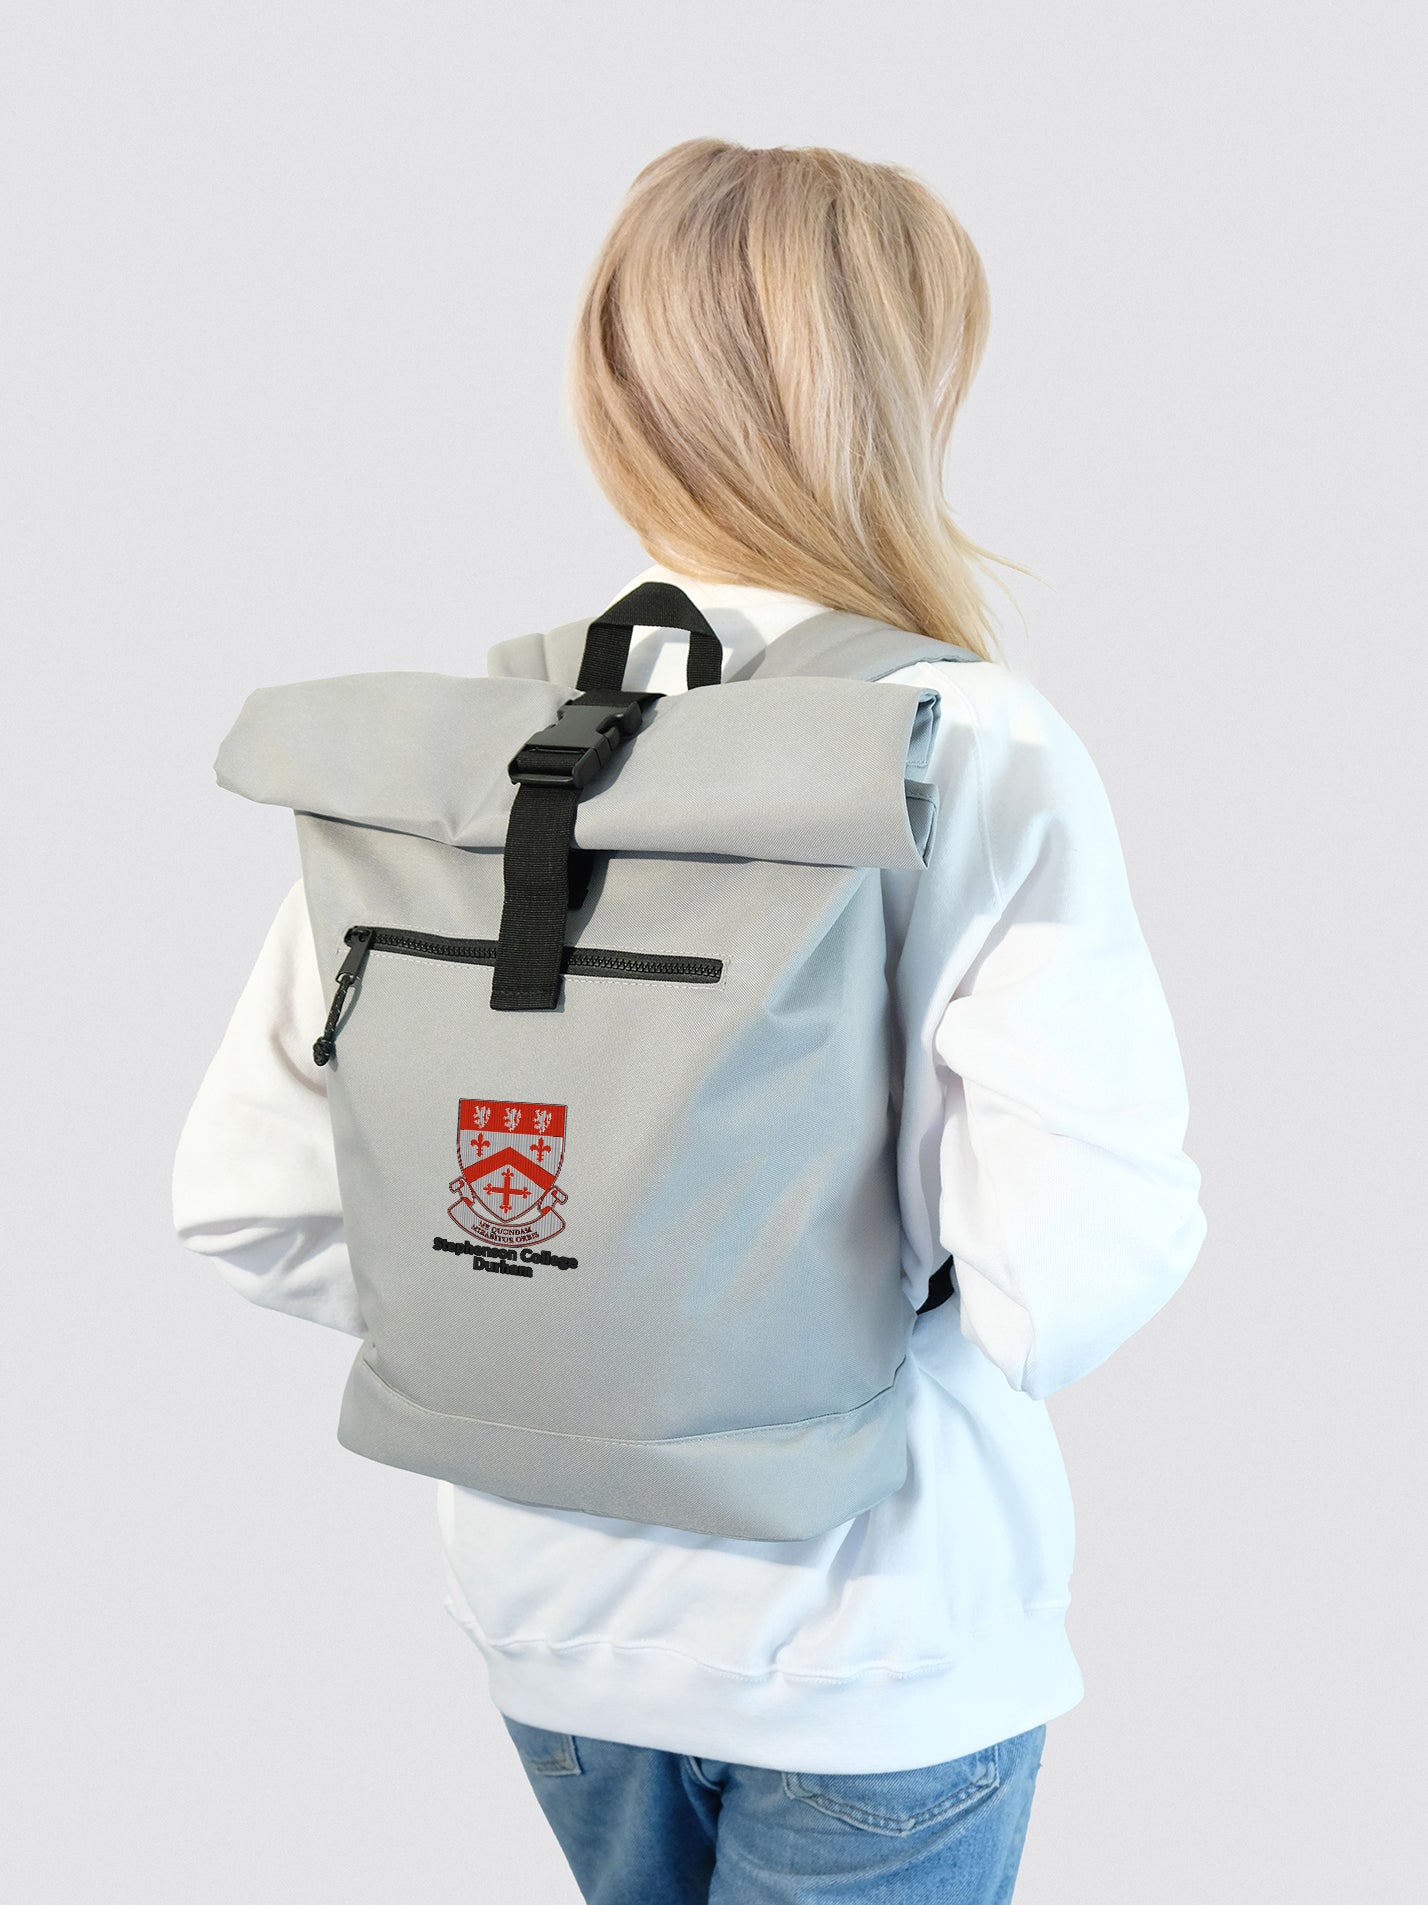 Stephenson College Durham Roll Top Backpack